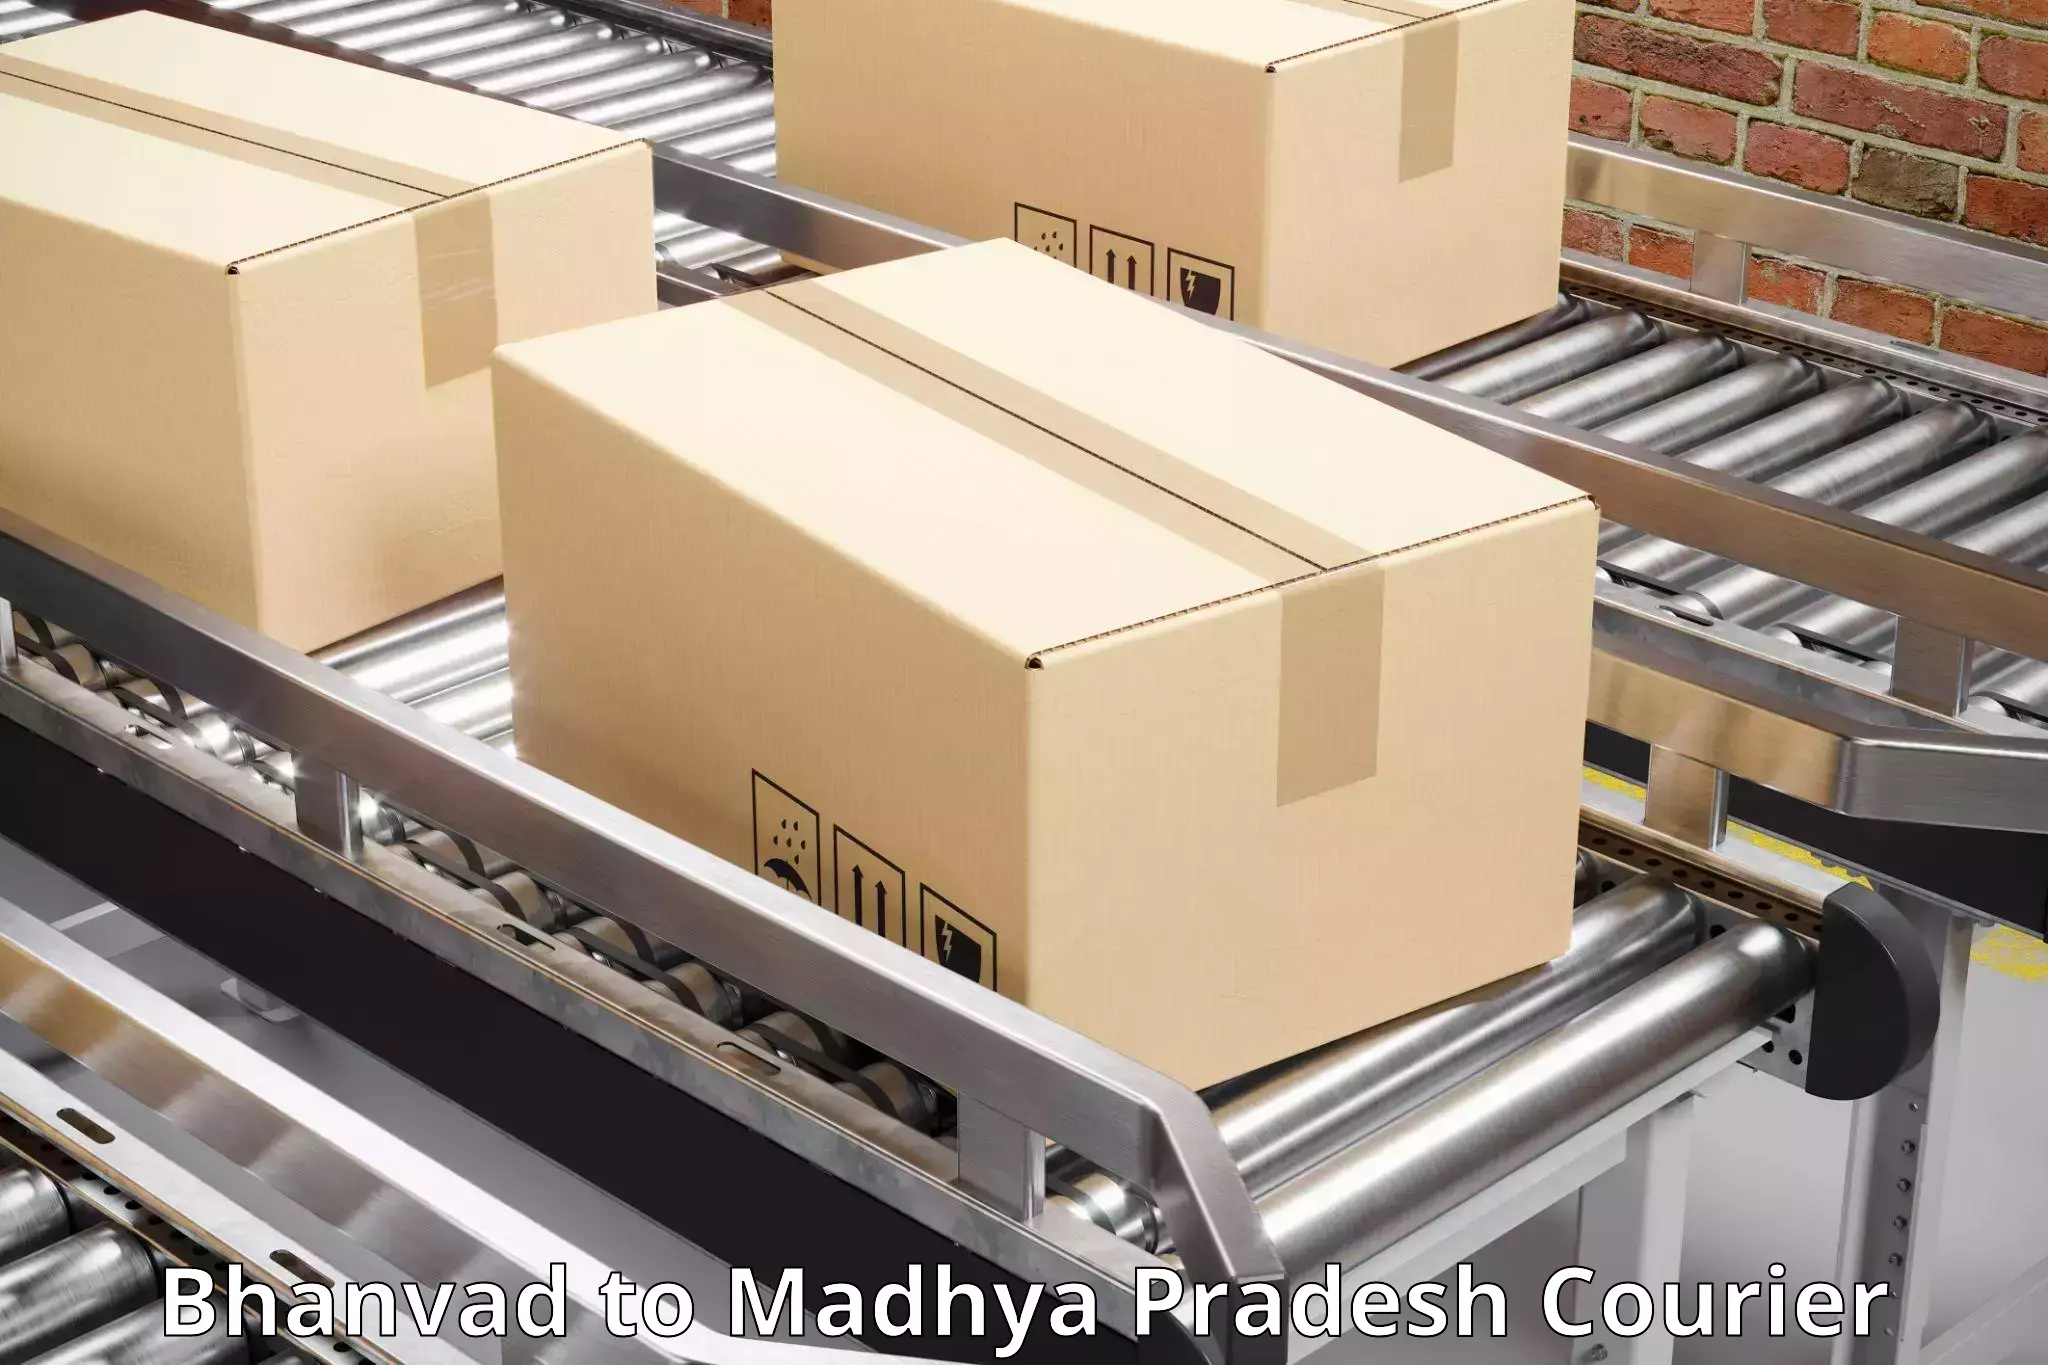 Full-service courier options Bhanvad to Bina